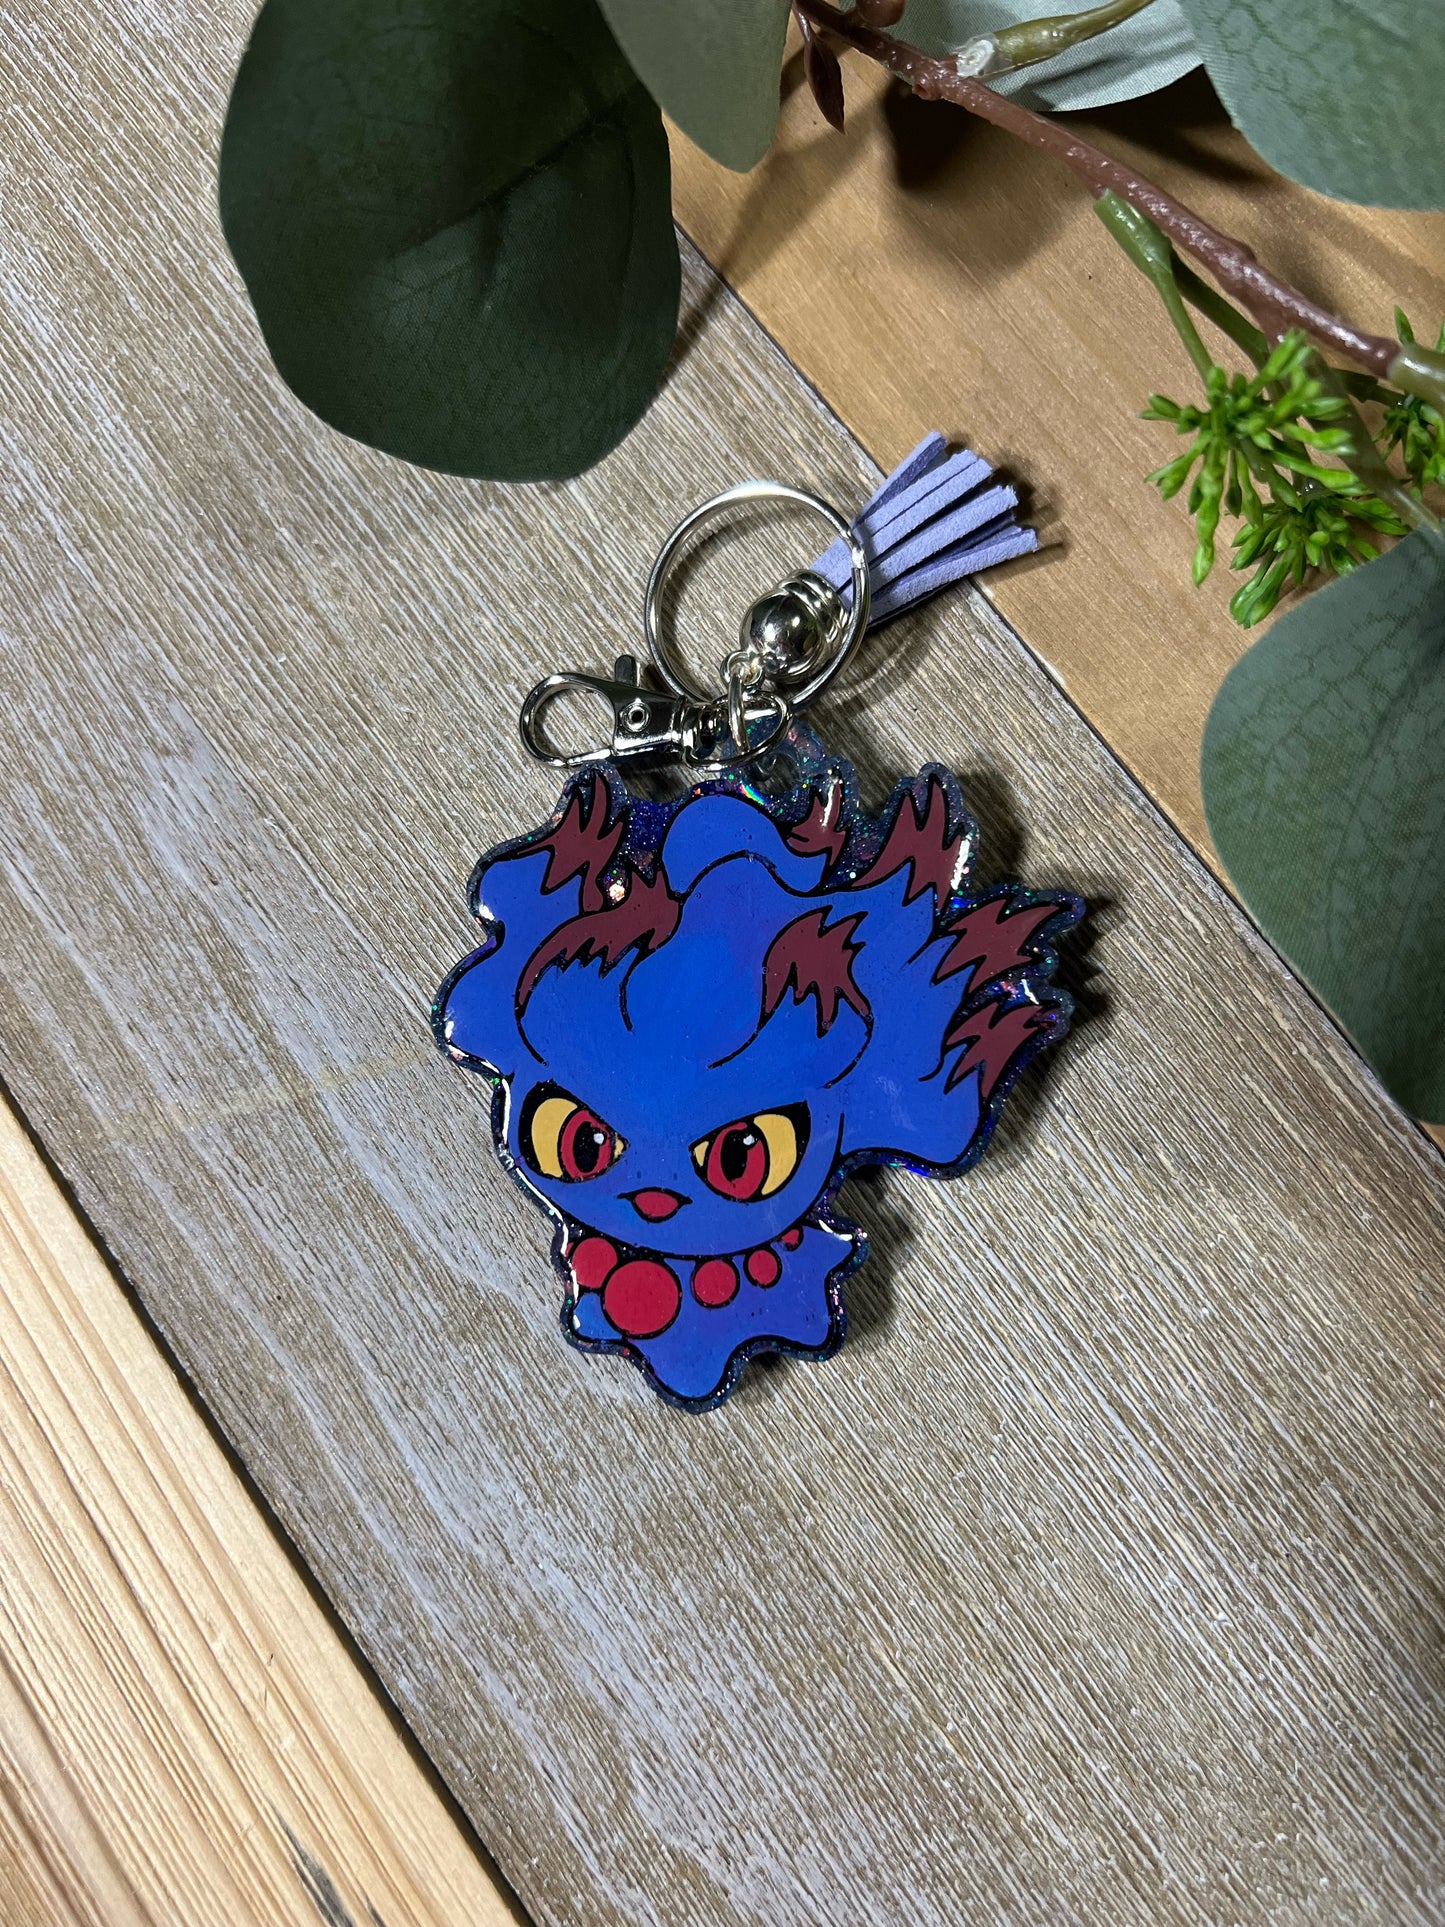 Pocket Monster Character Keychains